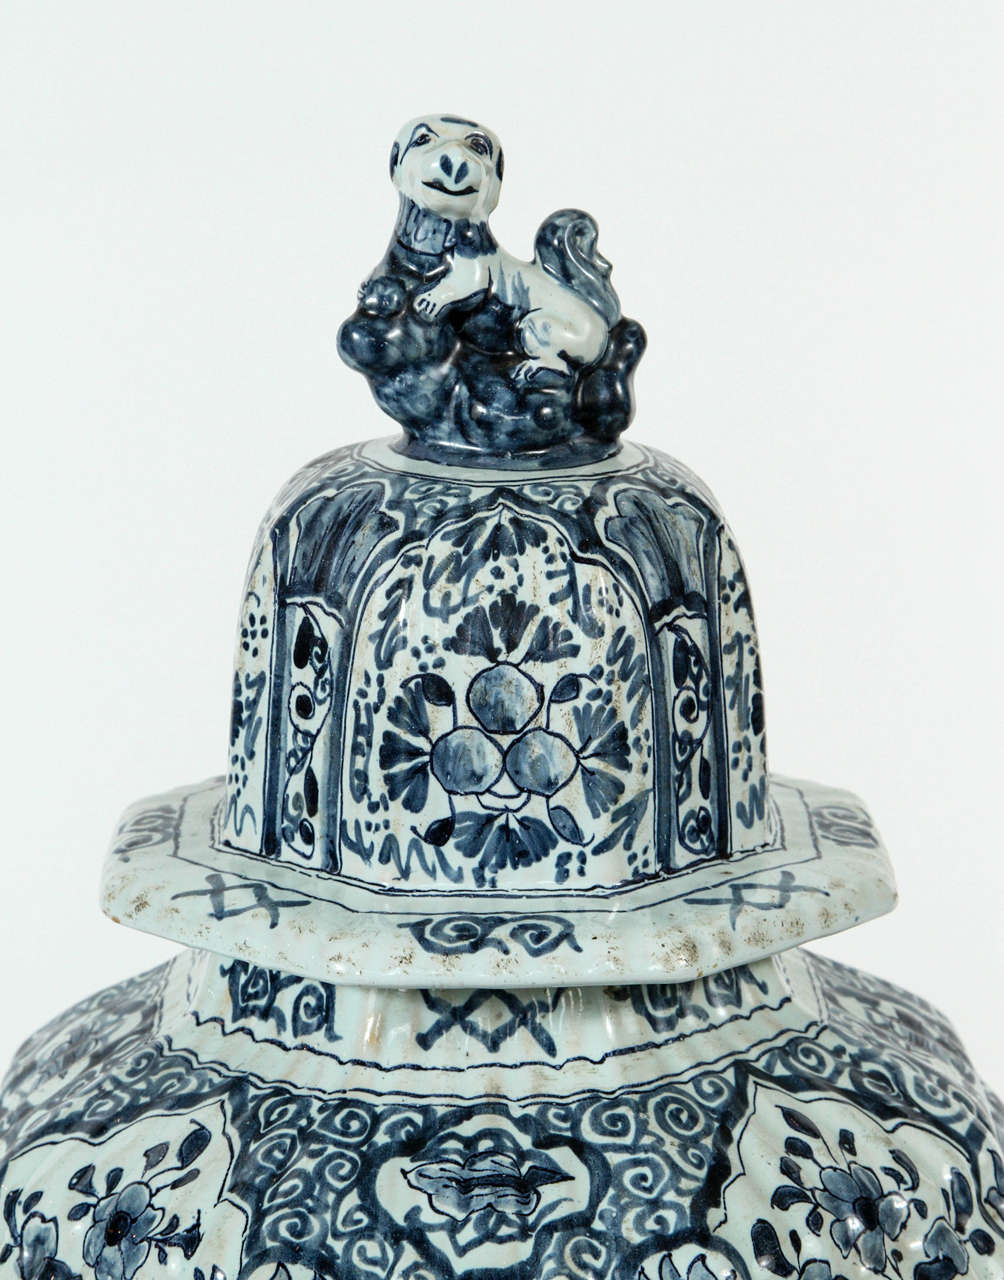 Dutch Pair of Large Delft Blue and White Ginger Jars and Covers, circa 1800